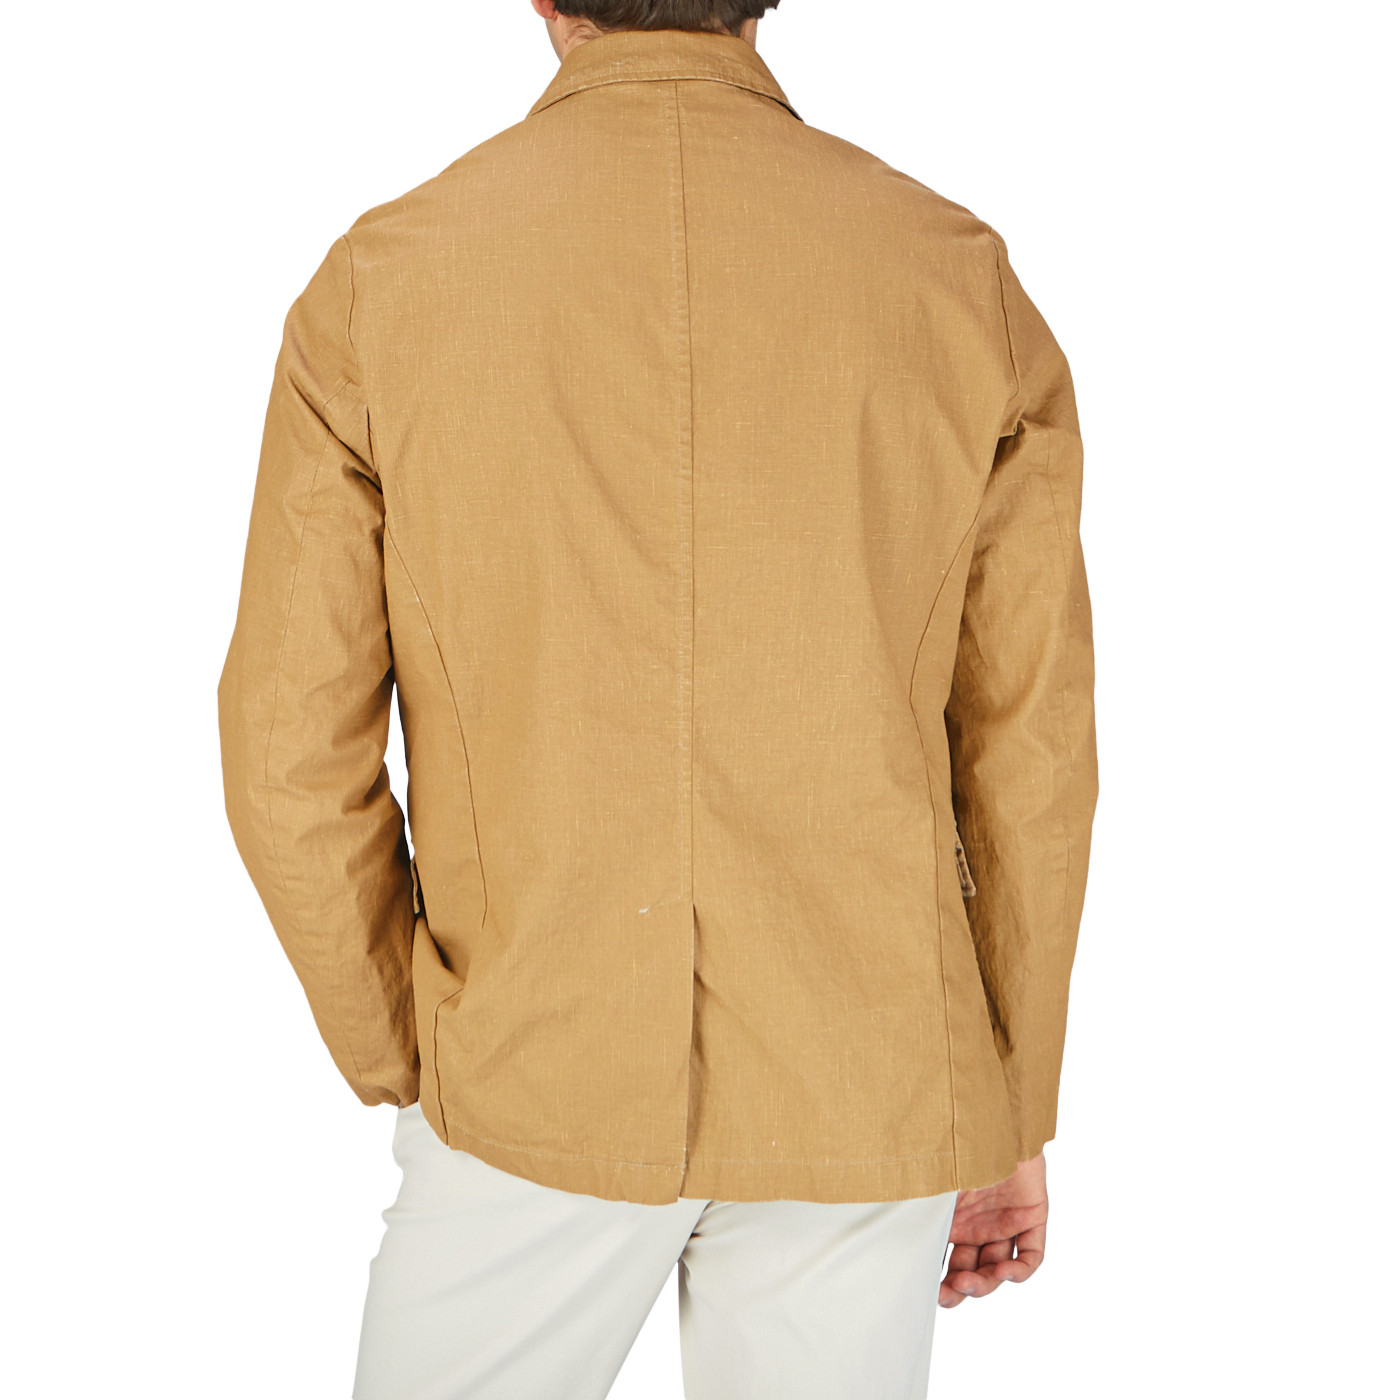 The back view of a man wearing a L'Impermeabile Camel Beige Waxed Linen College LL Jacket.